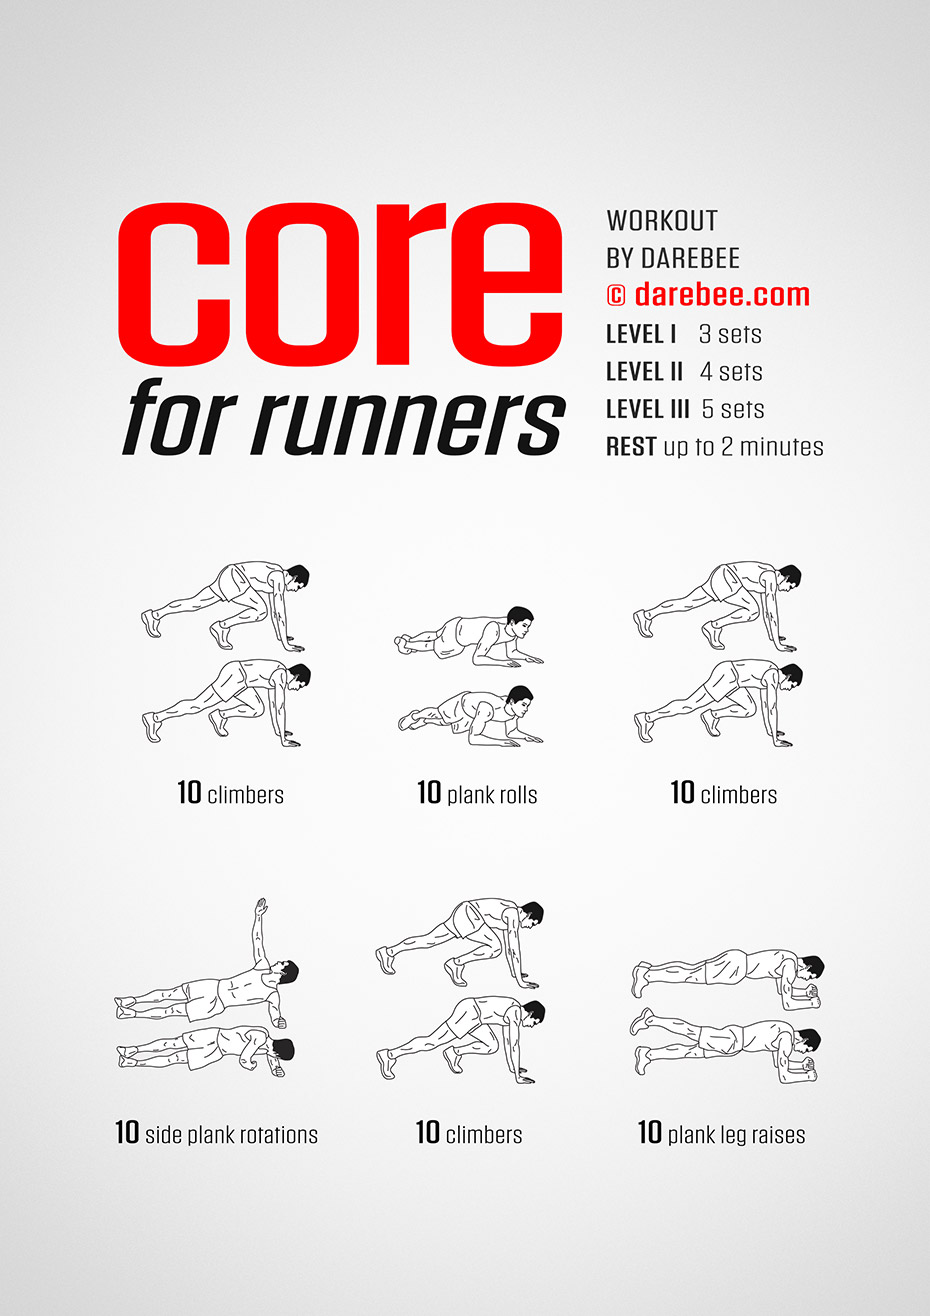 https://hanoverxc.weebly.com/uploads/1/3/2/1/13212452/core-for-runners-workout.jpeg